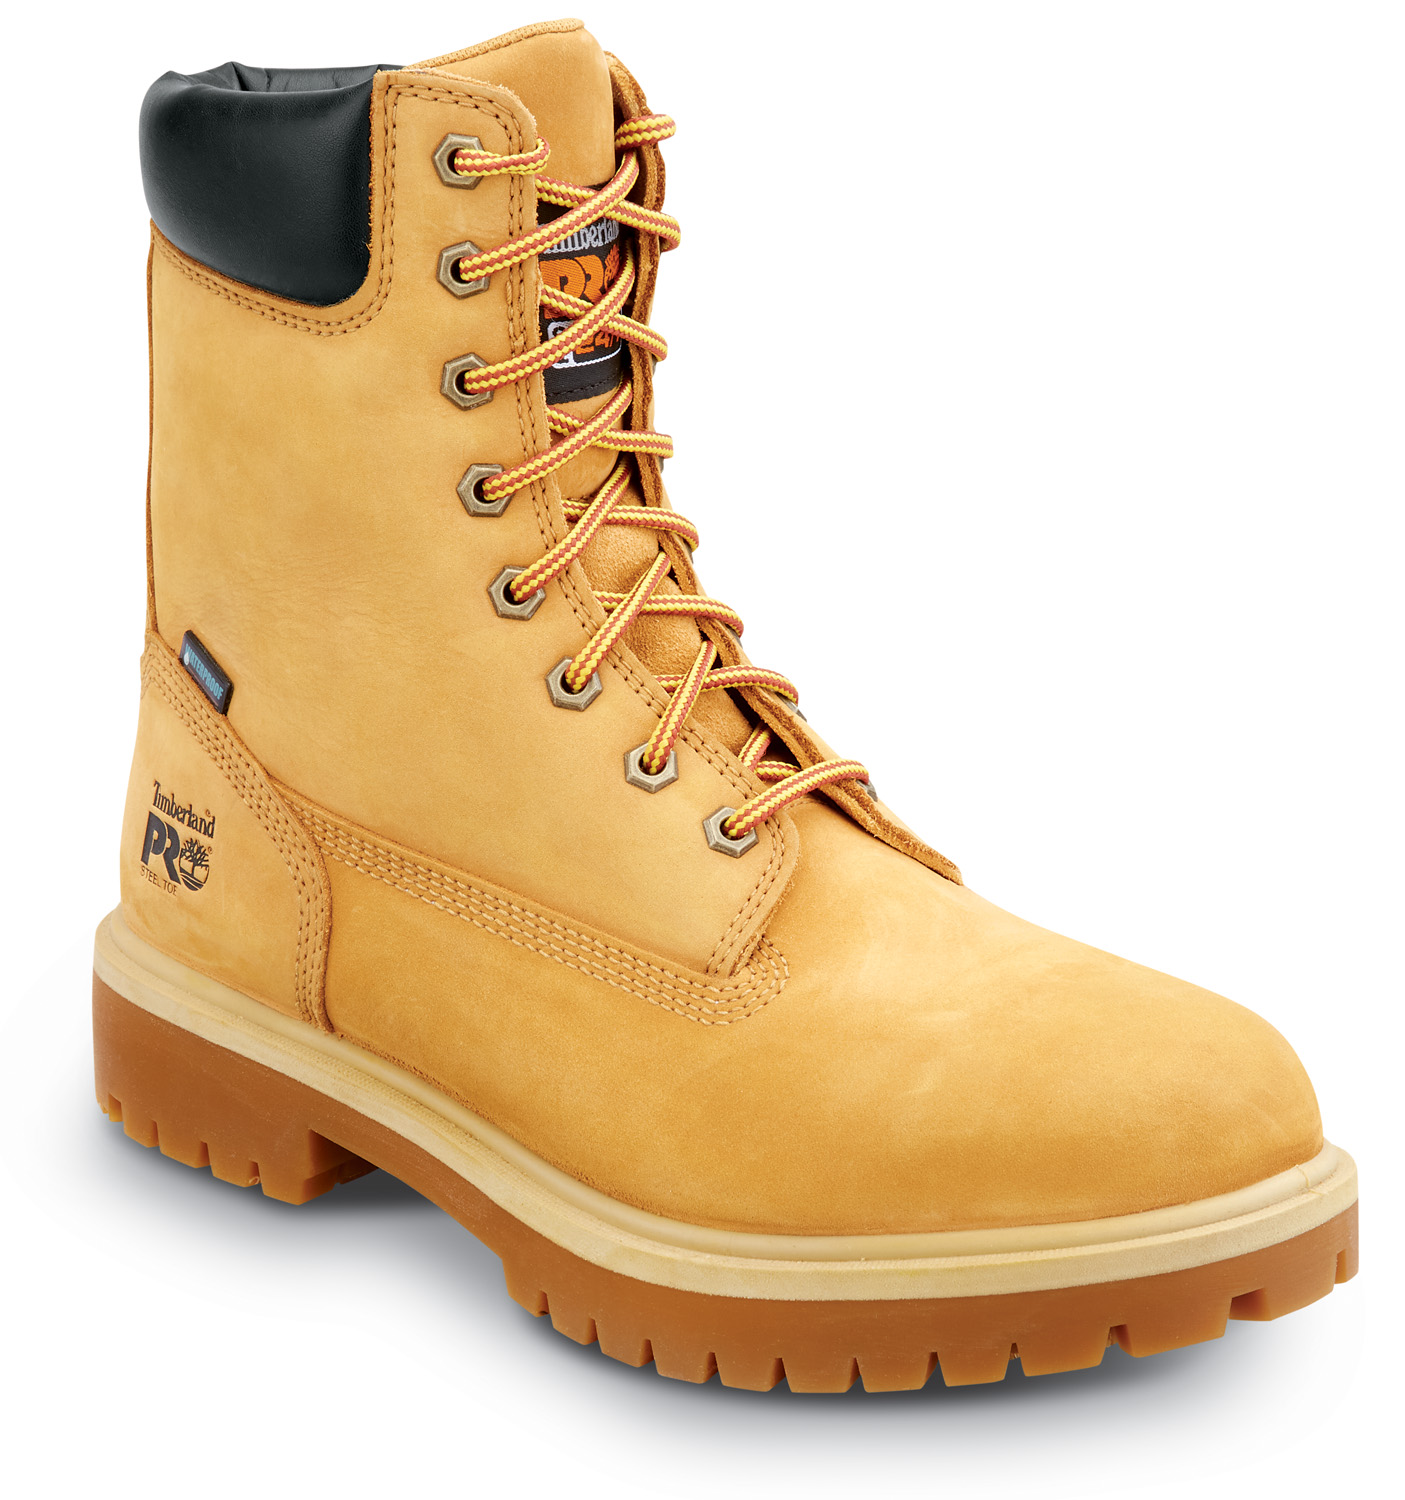 timberland pro 8 inch steel toe boots